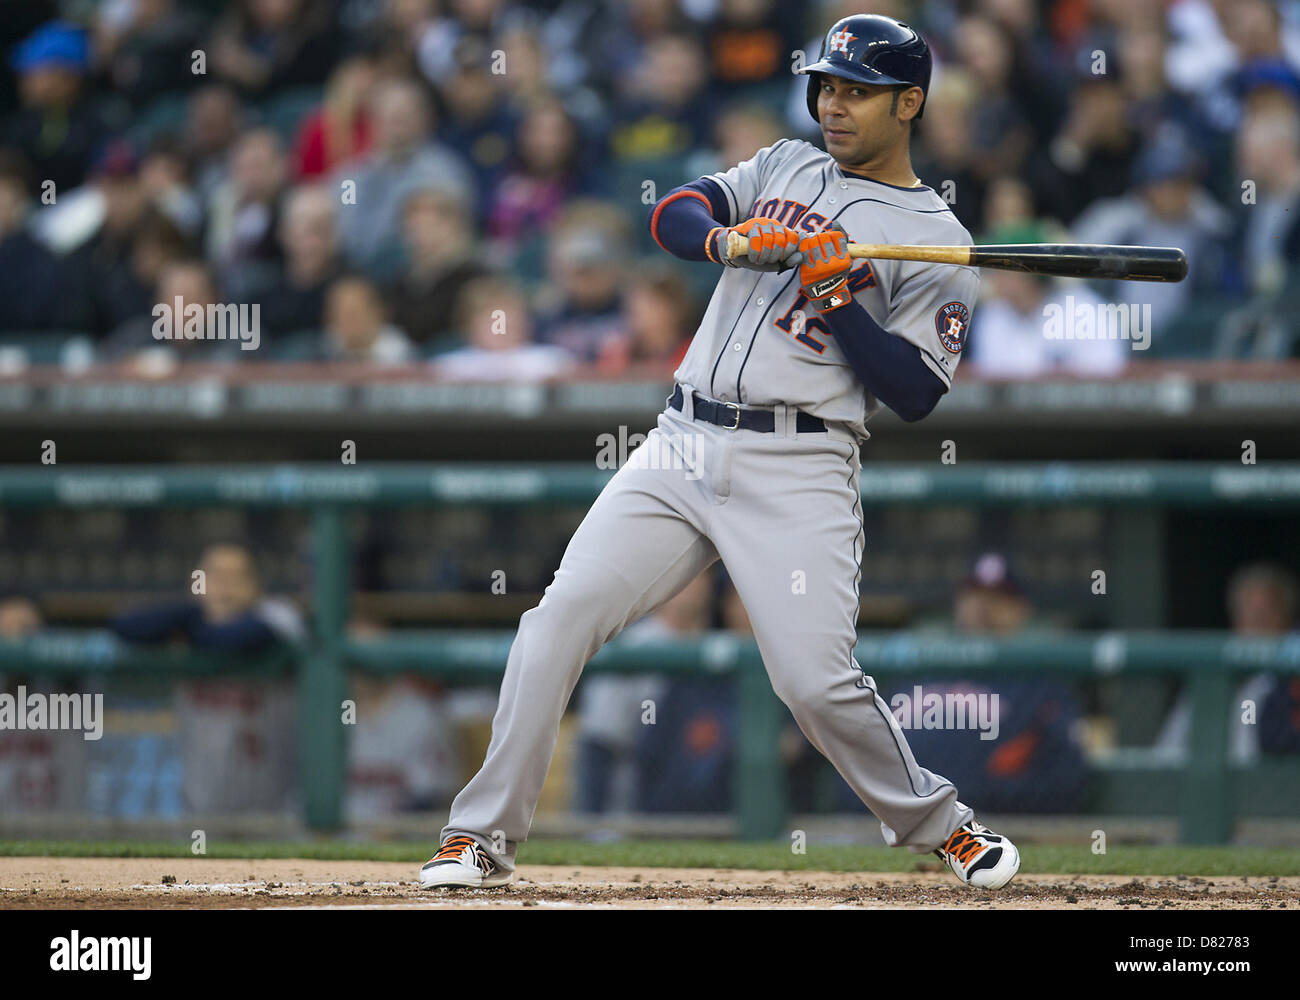 May 13, 2013 - Detroit, Michigan, United States of America - May 13, 2013: Houston Astros infielder Carlos Pena (12) at bat during MLB game action between the Houston Astros and the Detroit Tigers at Comerica Park in Detroit, Michigan. The Tigers defeated the Astros 7-2. Stock Photo